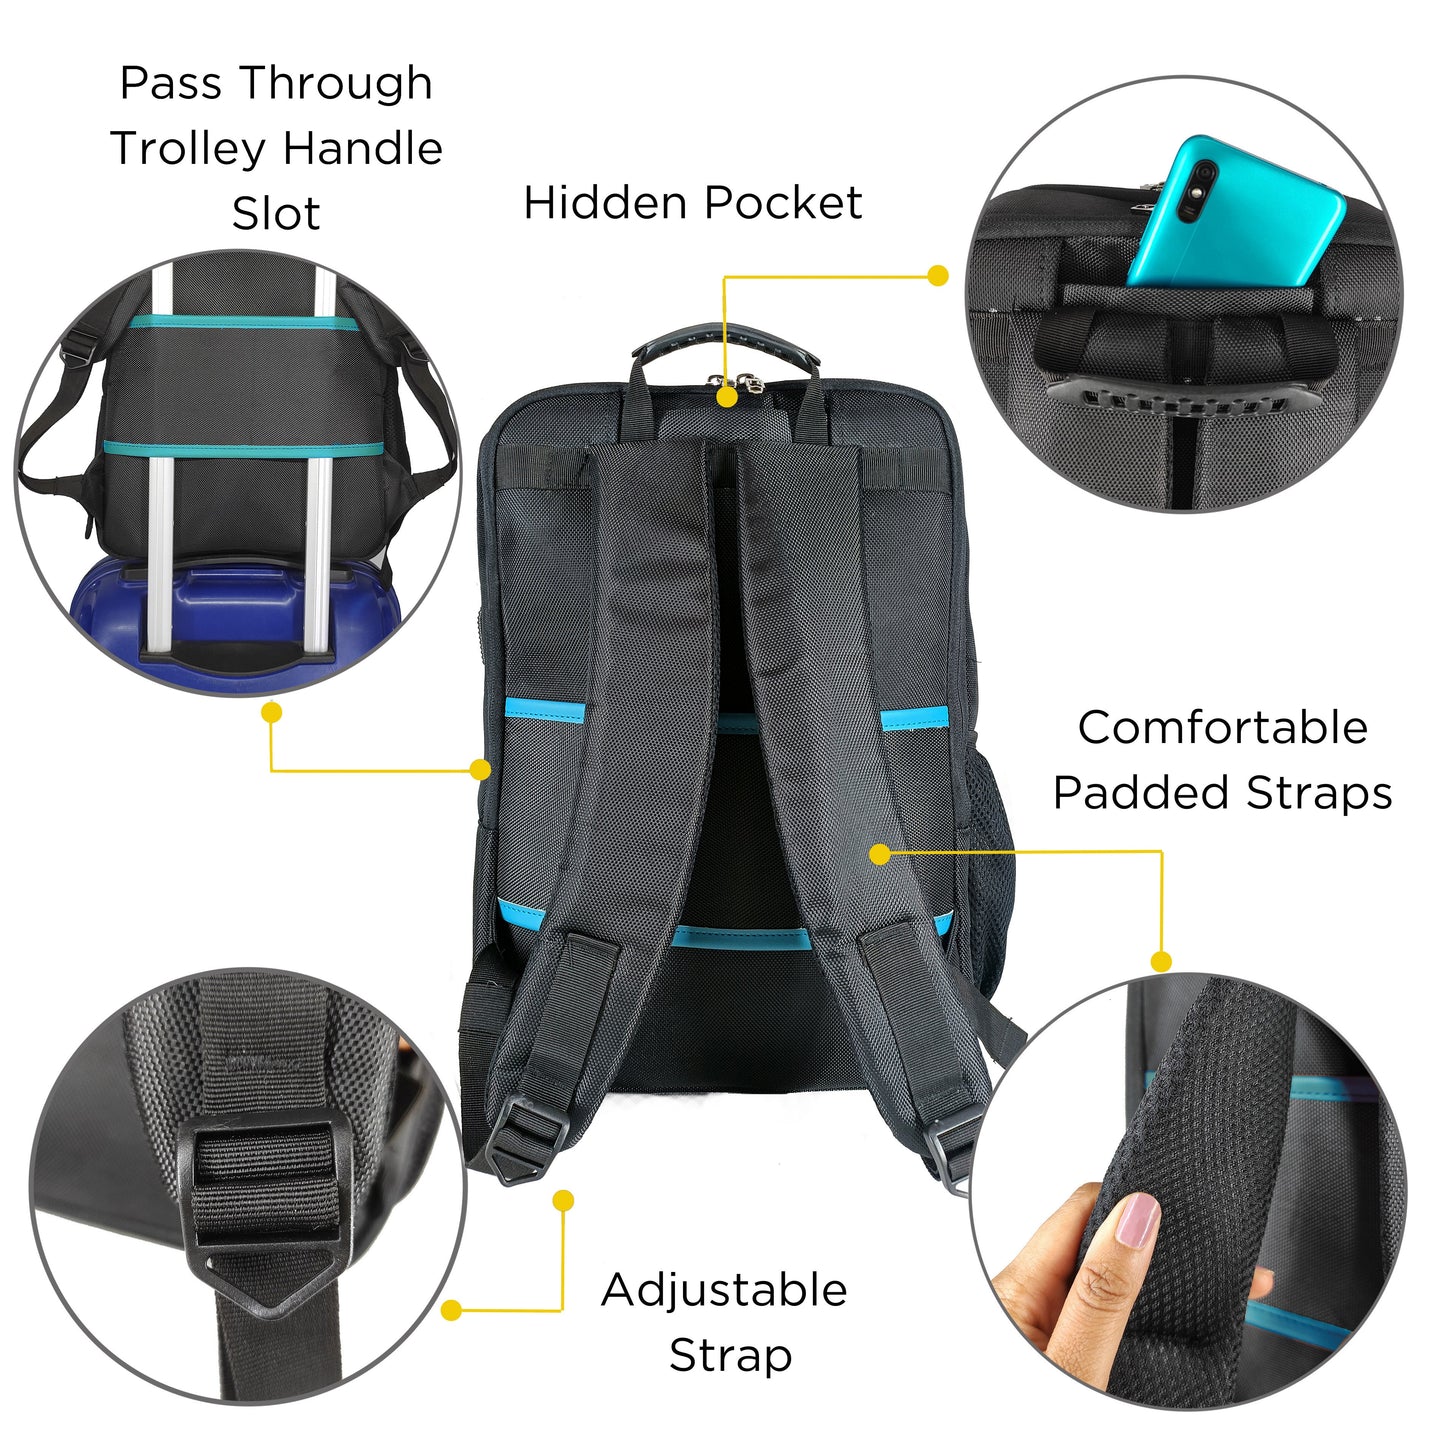 Travel Combo: Backpack Origami and Music Border Passport Case